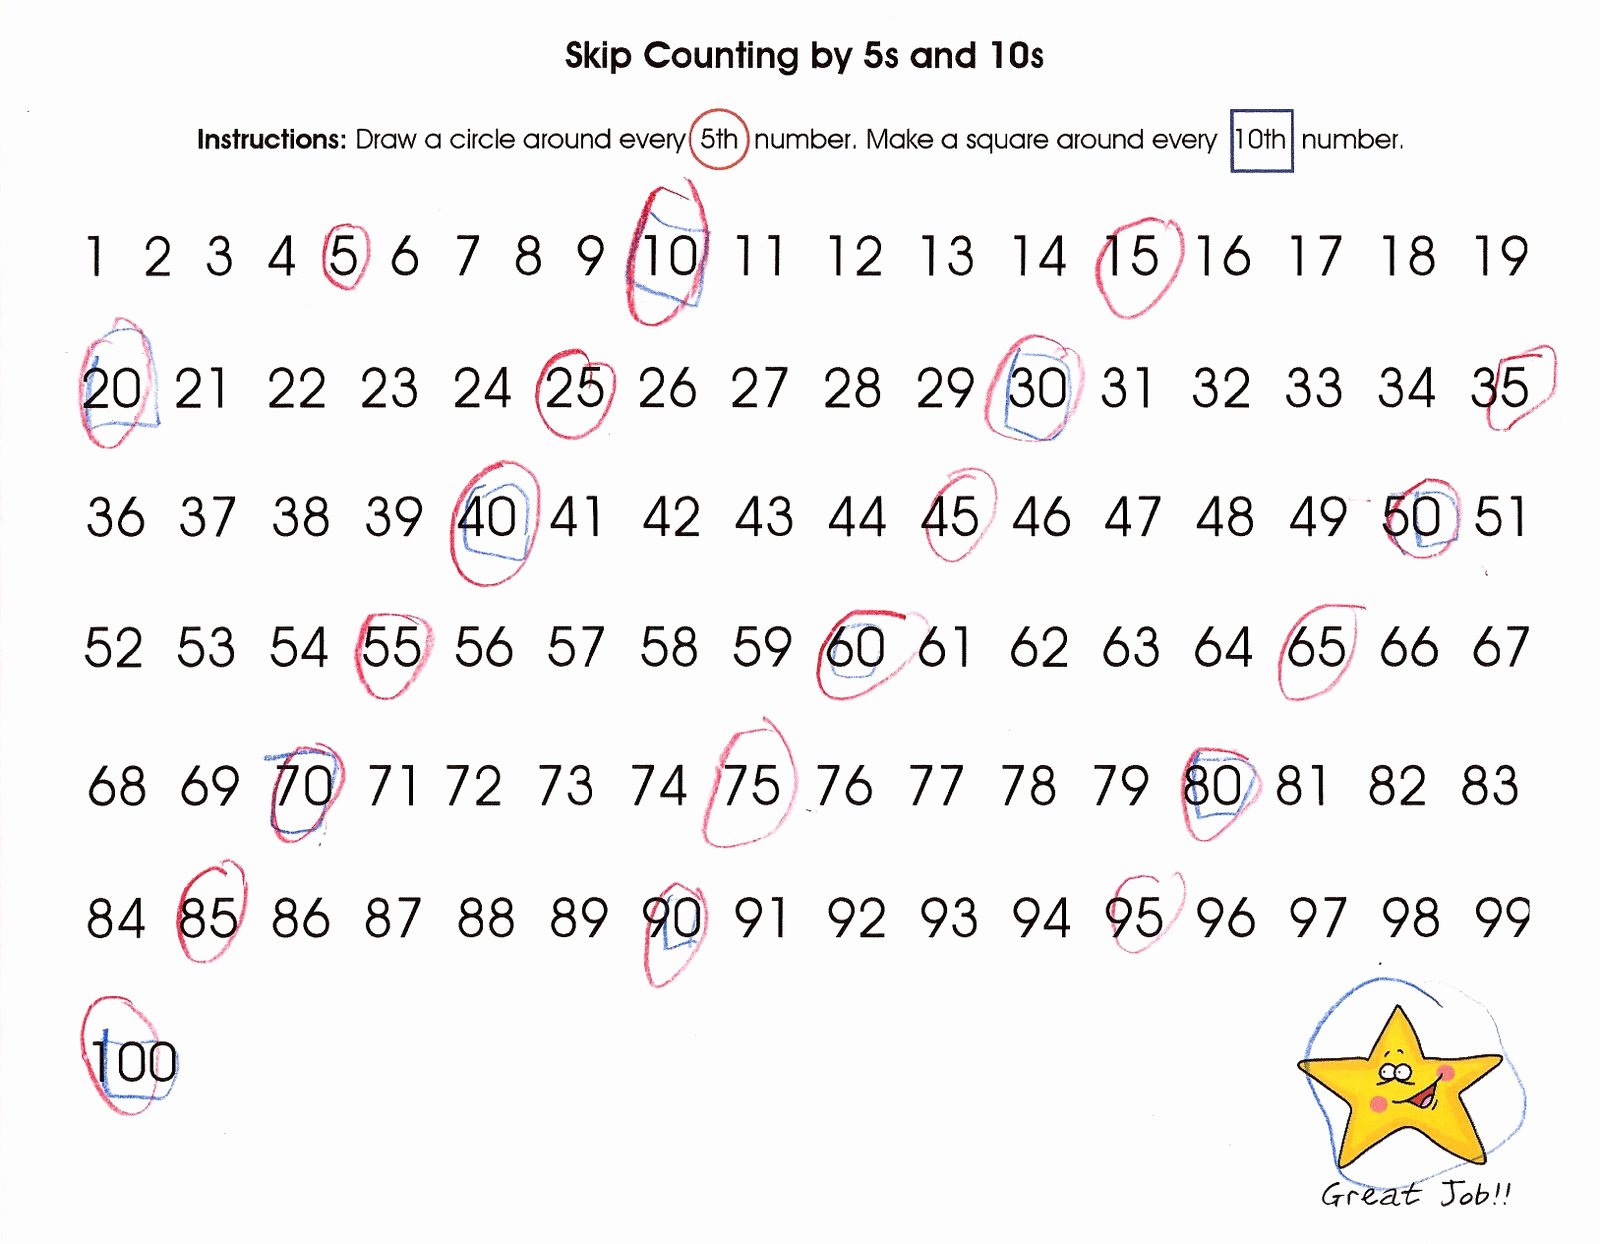 Count by 5s Worksheet Fresh Relentlessly Fun Deceptively Educational Skip Counting